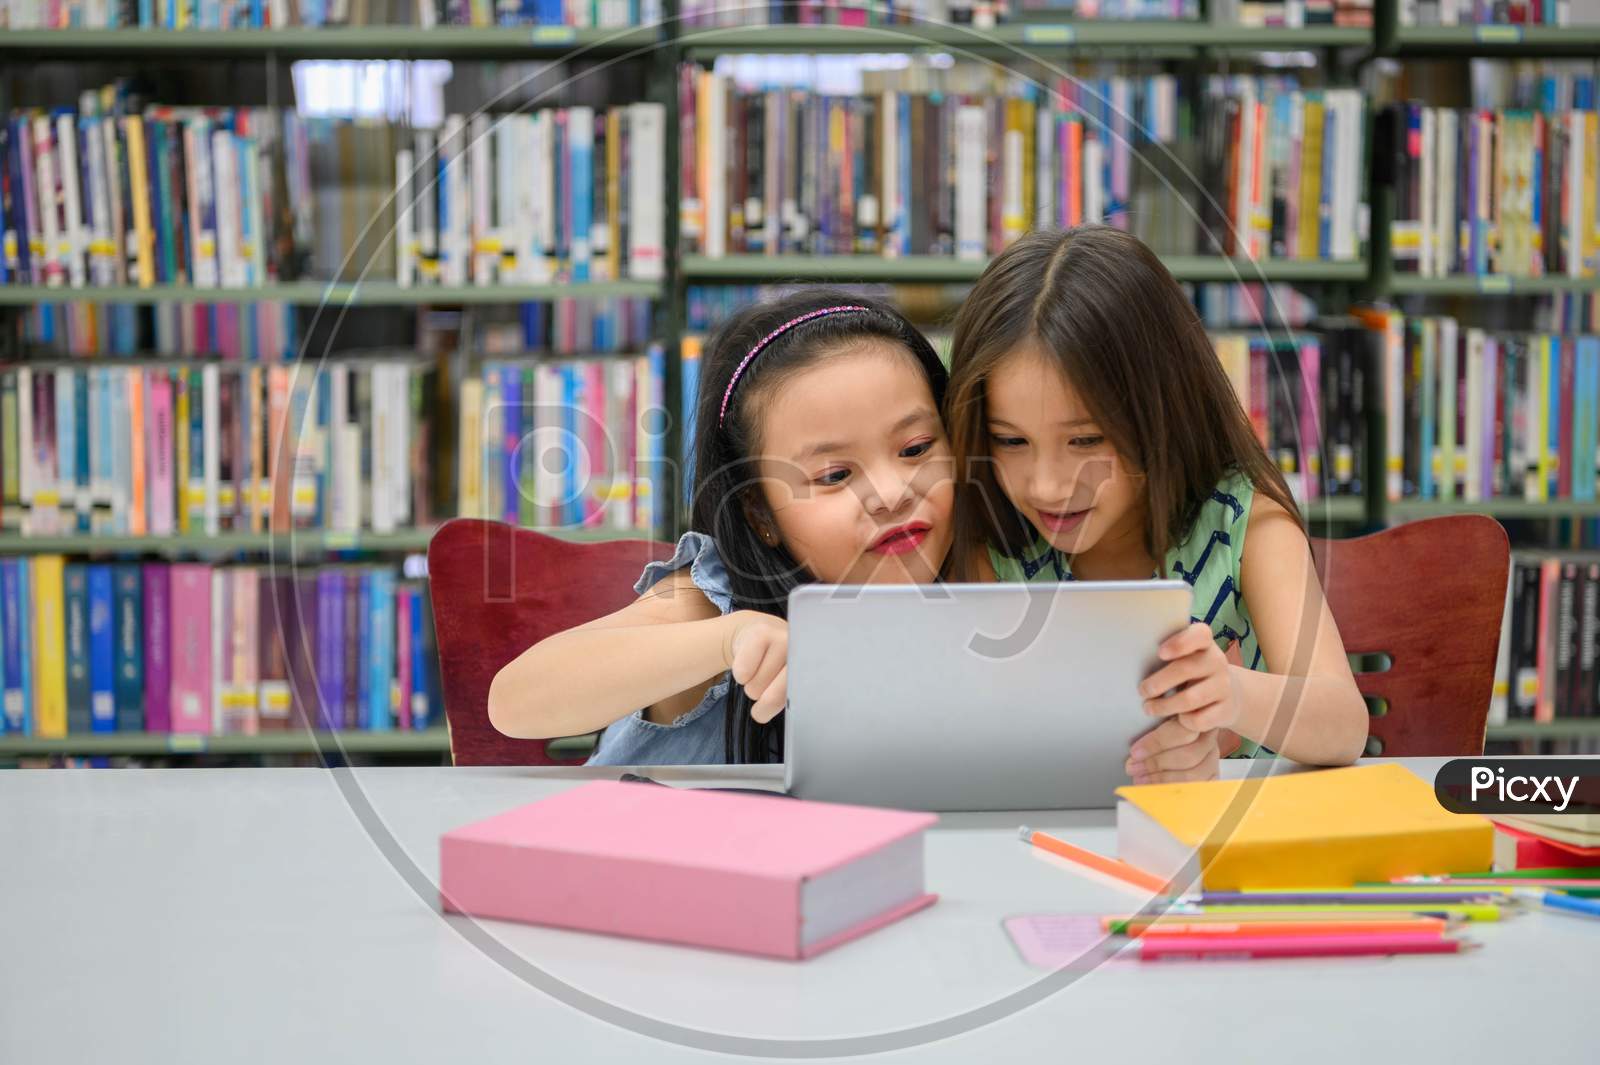 Two Little Happy Cute Girls Playing On A Tablet Pc Computing Device In Library At School. Education And Self Learning Wireless Technology Concept. People Lifestyles And Friendship. Preschool Children